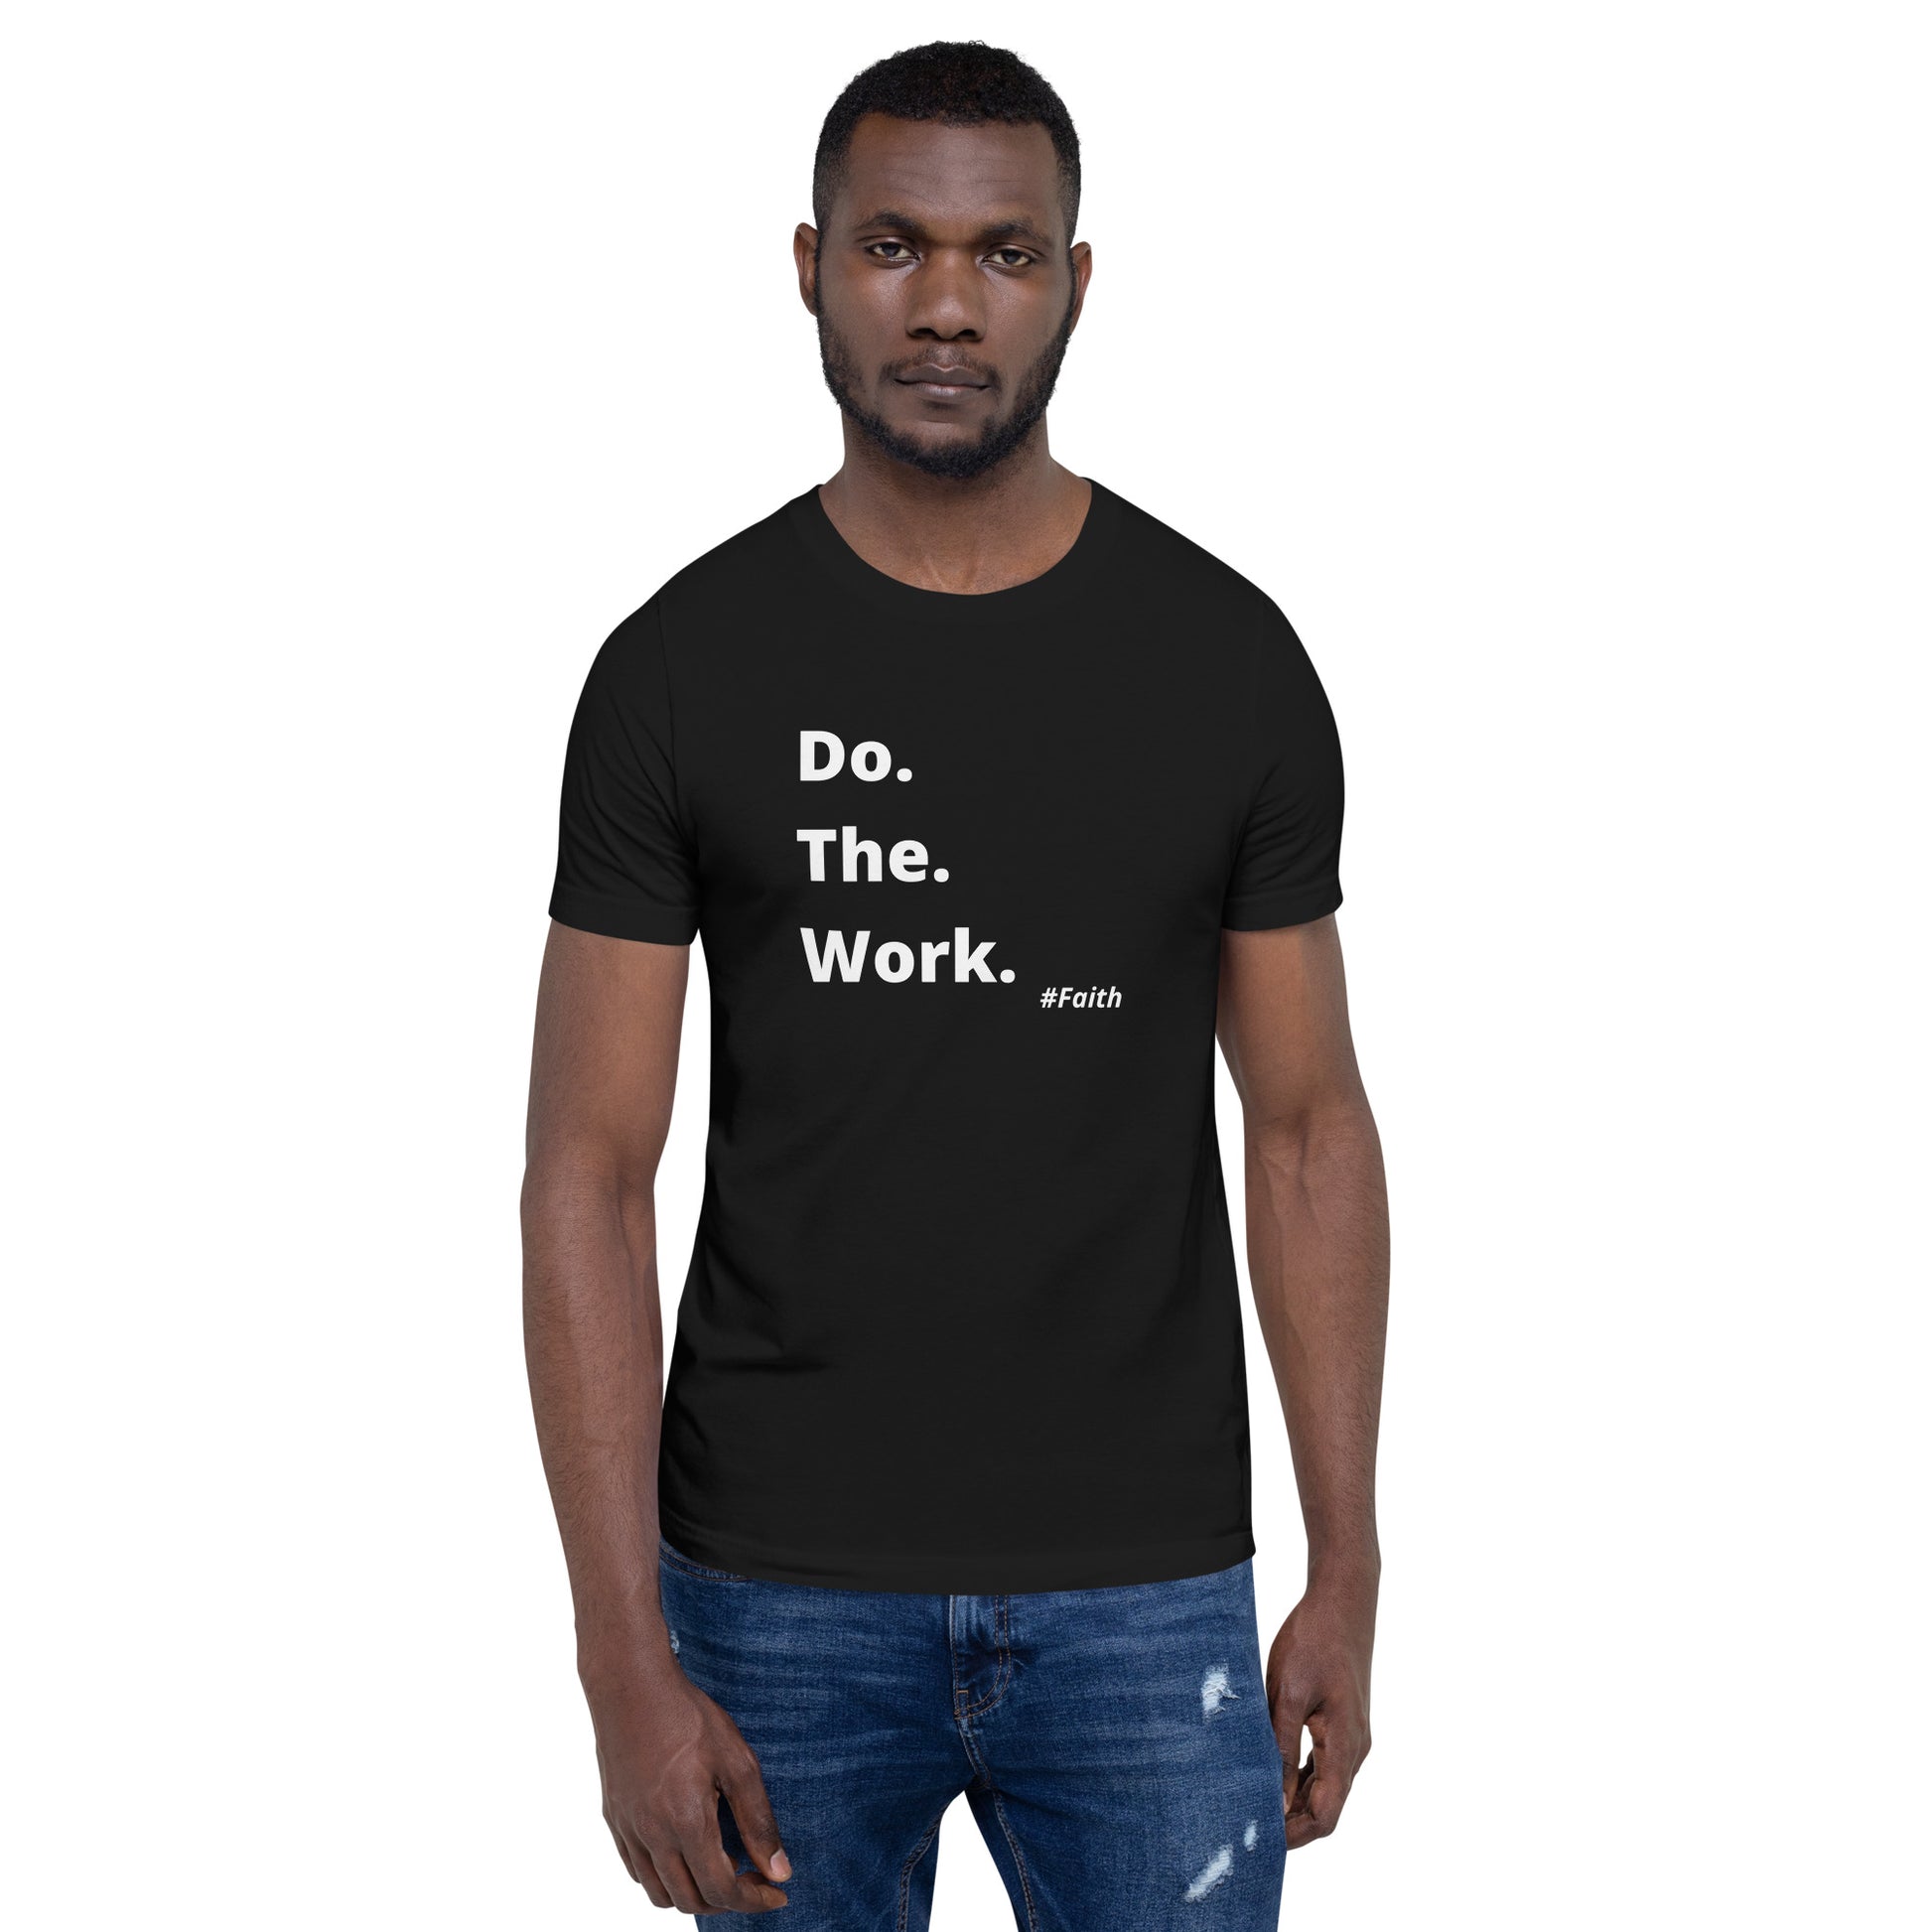 Work. – Black Short-Sleeve Unisex Do. The. F.A.I.T.H. - T-Shirt Connection